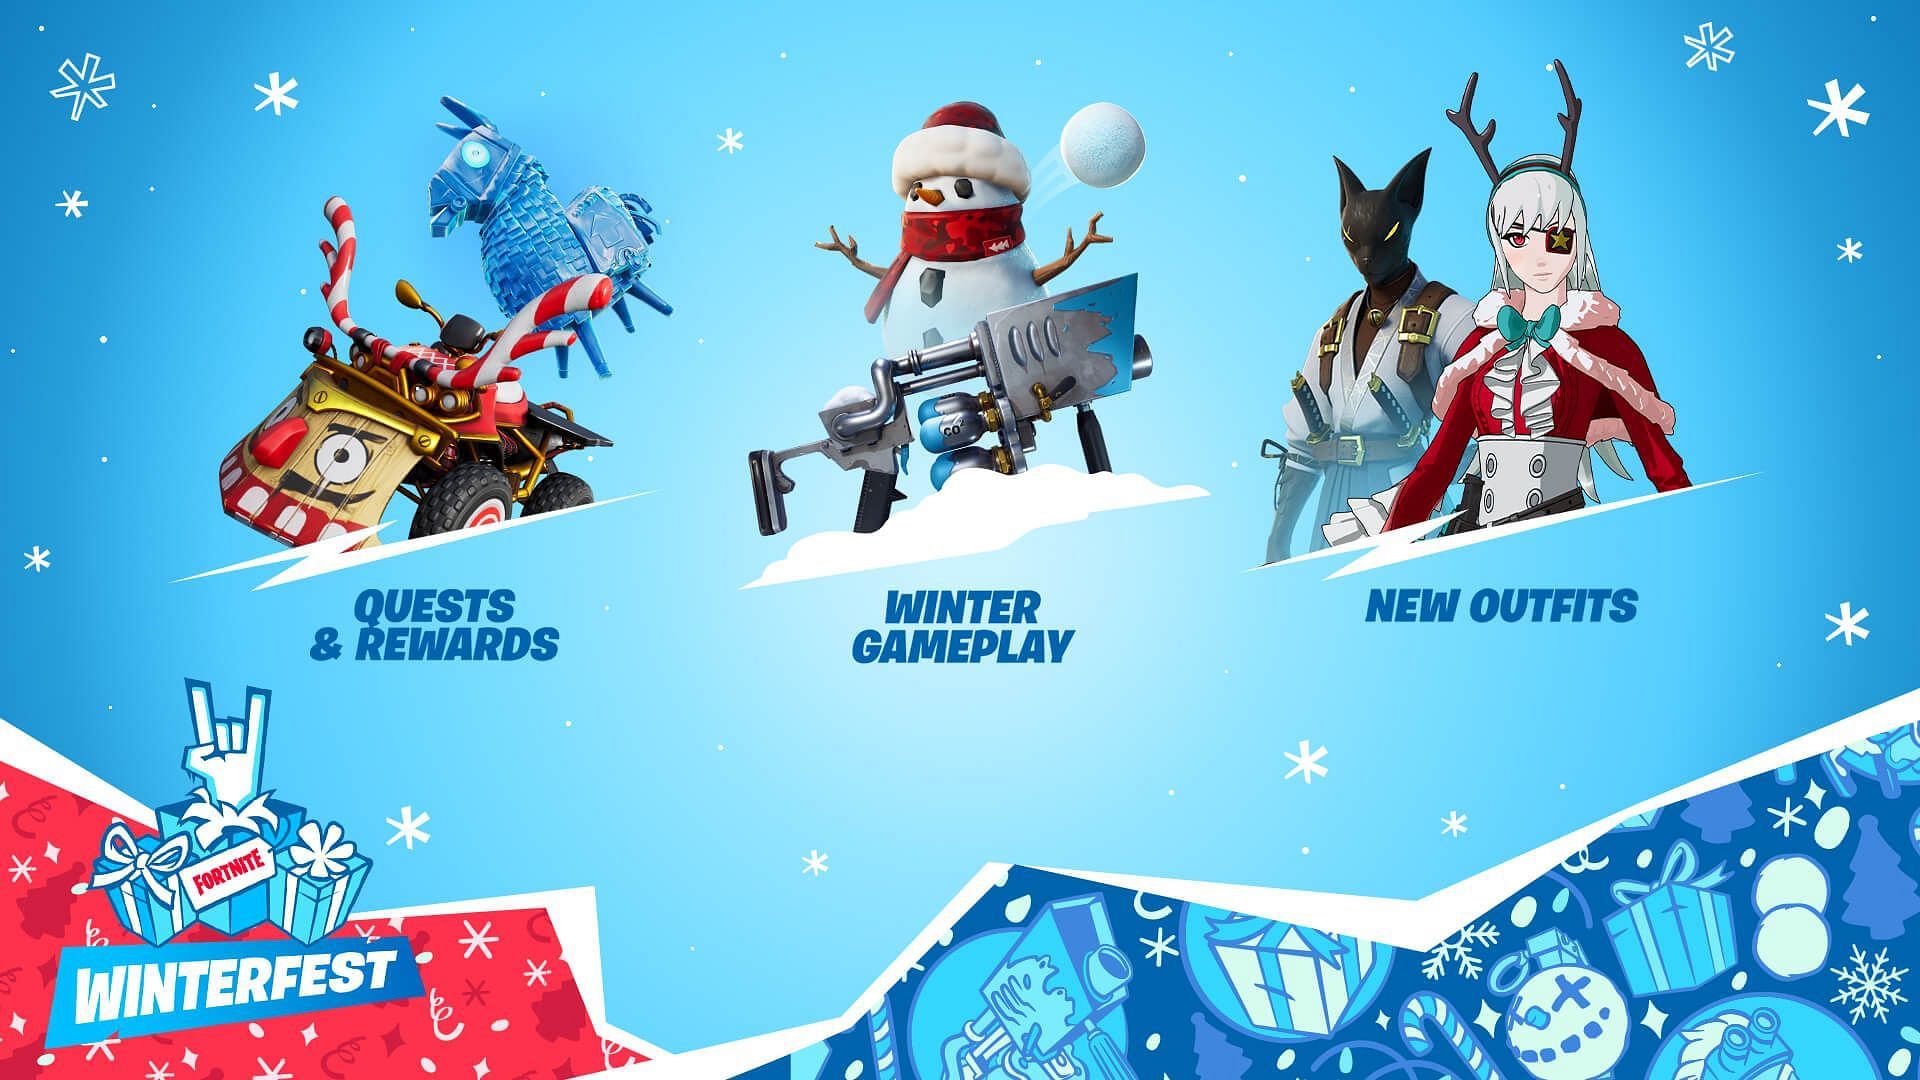 Fortnite is giving away free codes for skin bundles, pickaxes, and more